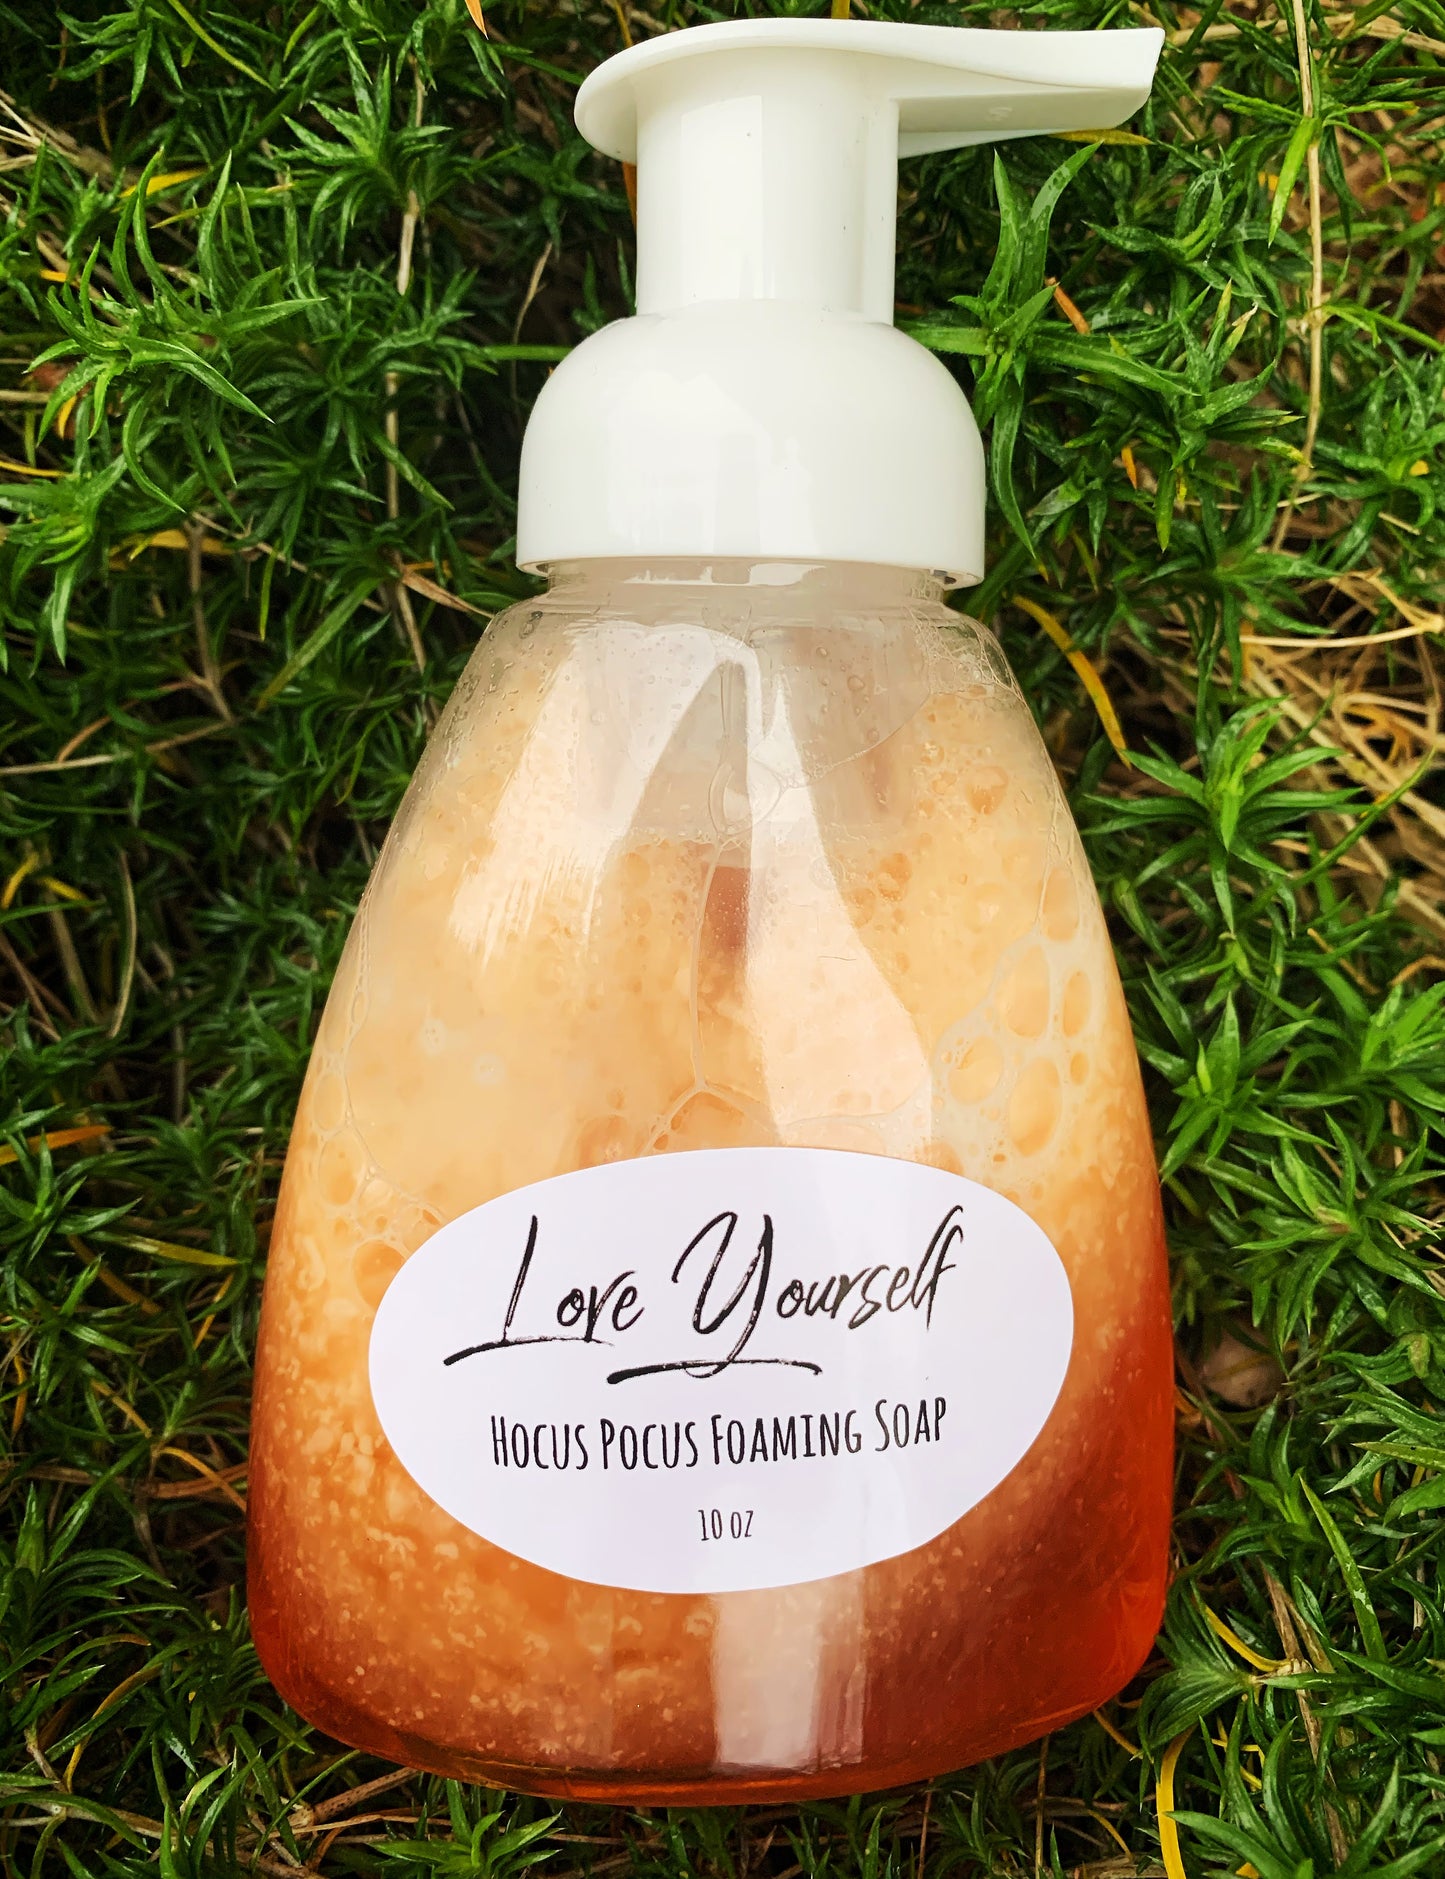 Hocus Pocus Foaming Soap by Love Yourself